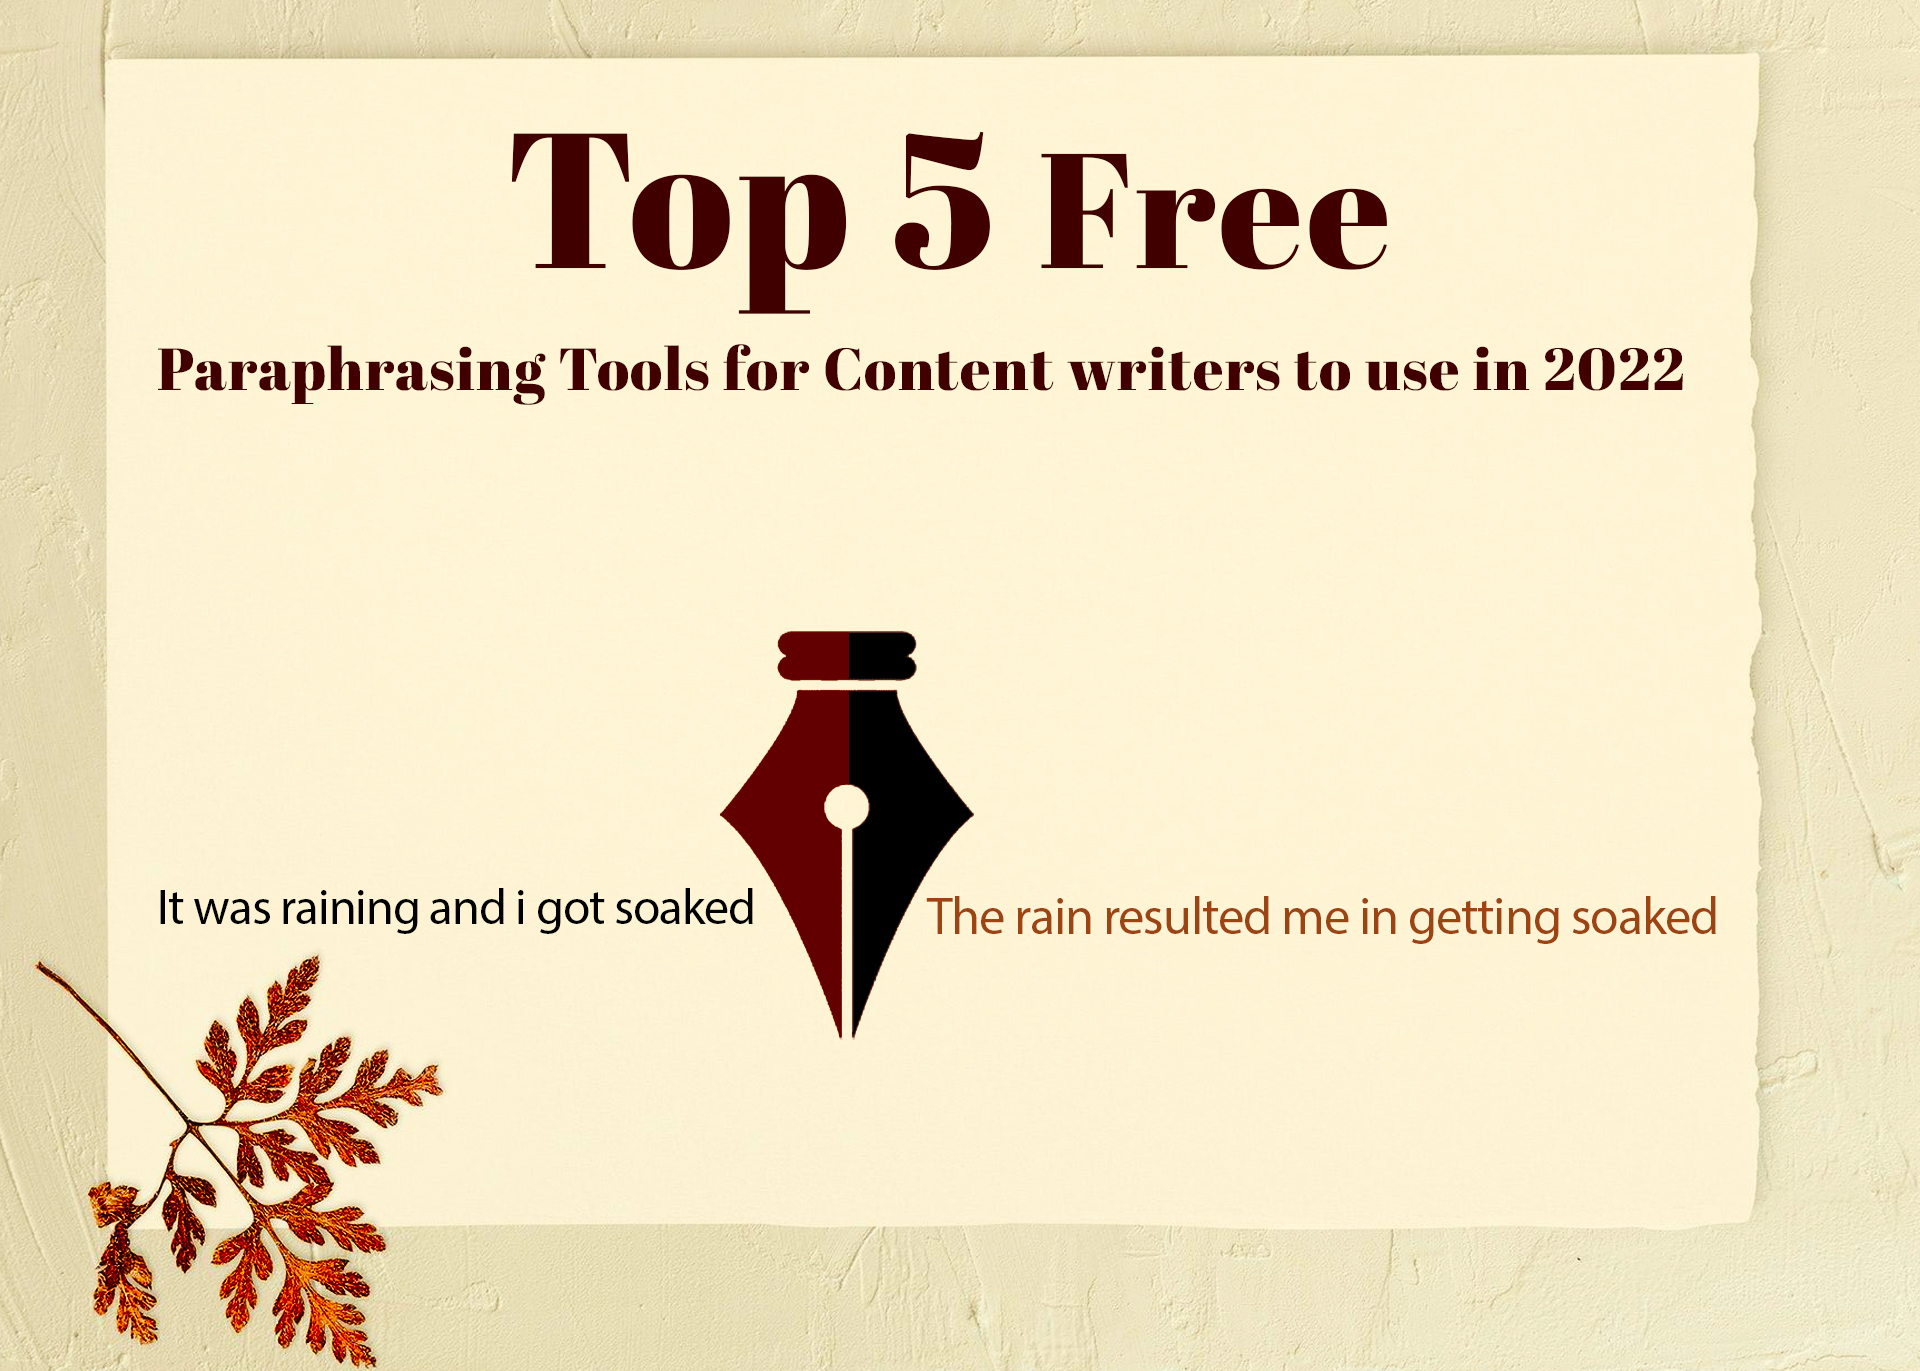 Top 5 Free* Paraphrasing Tools for Content writers to use in 2022